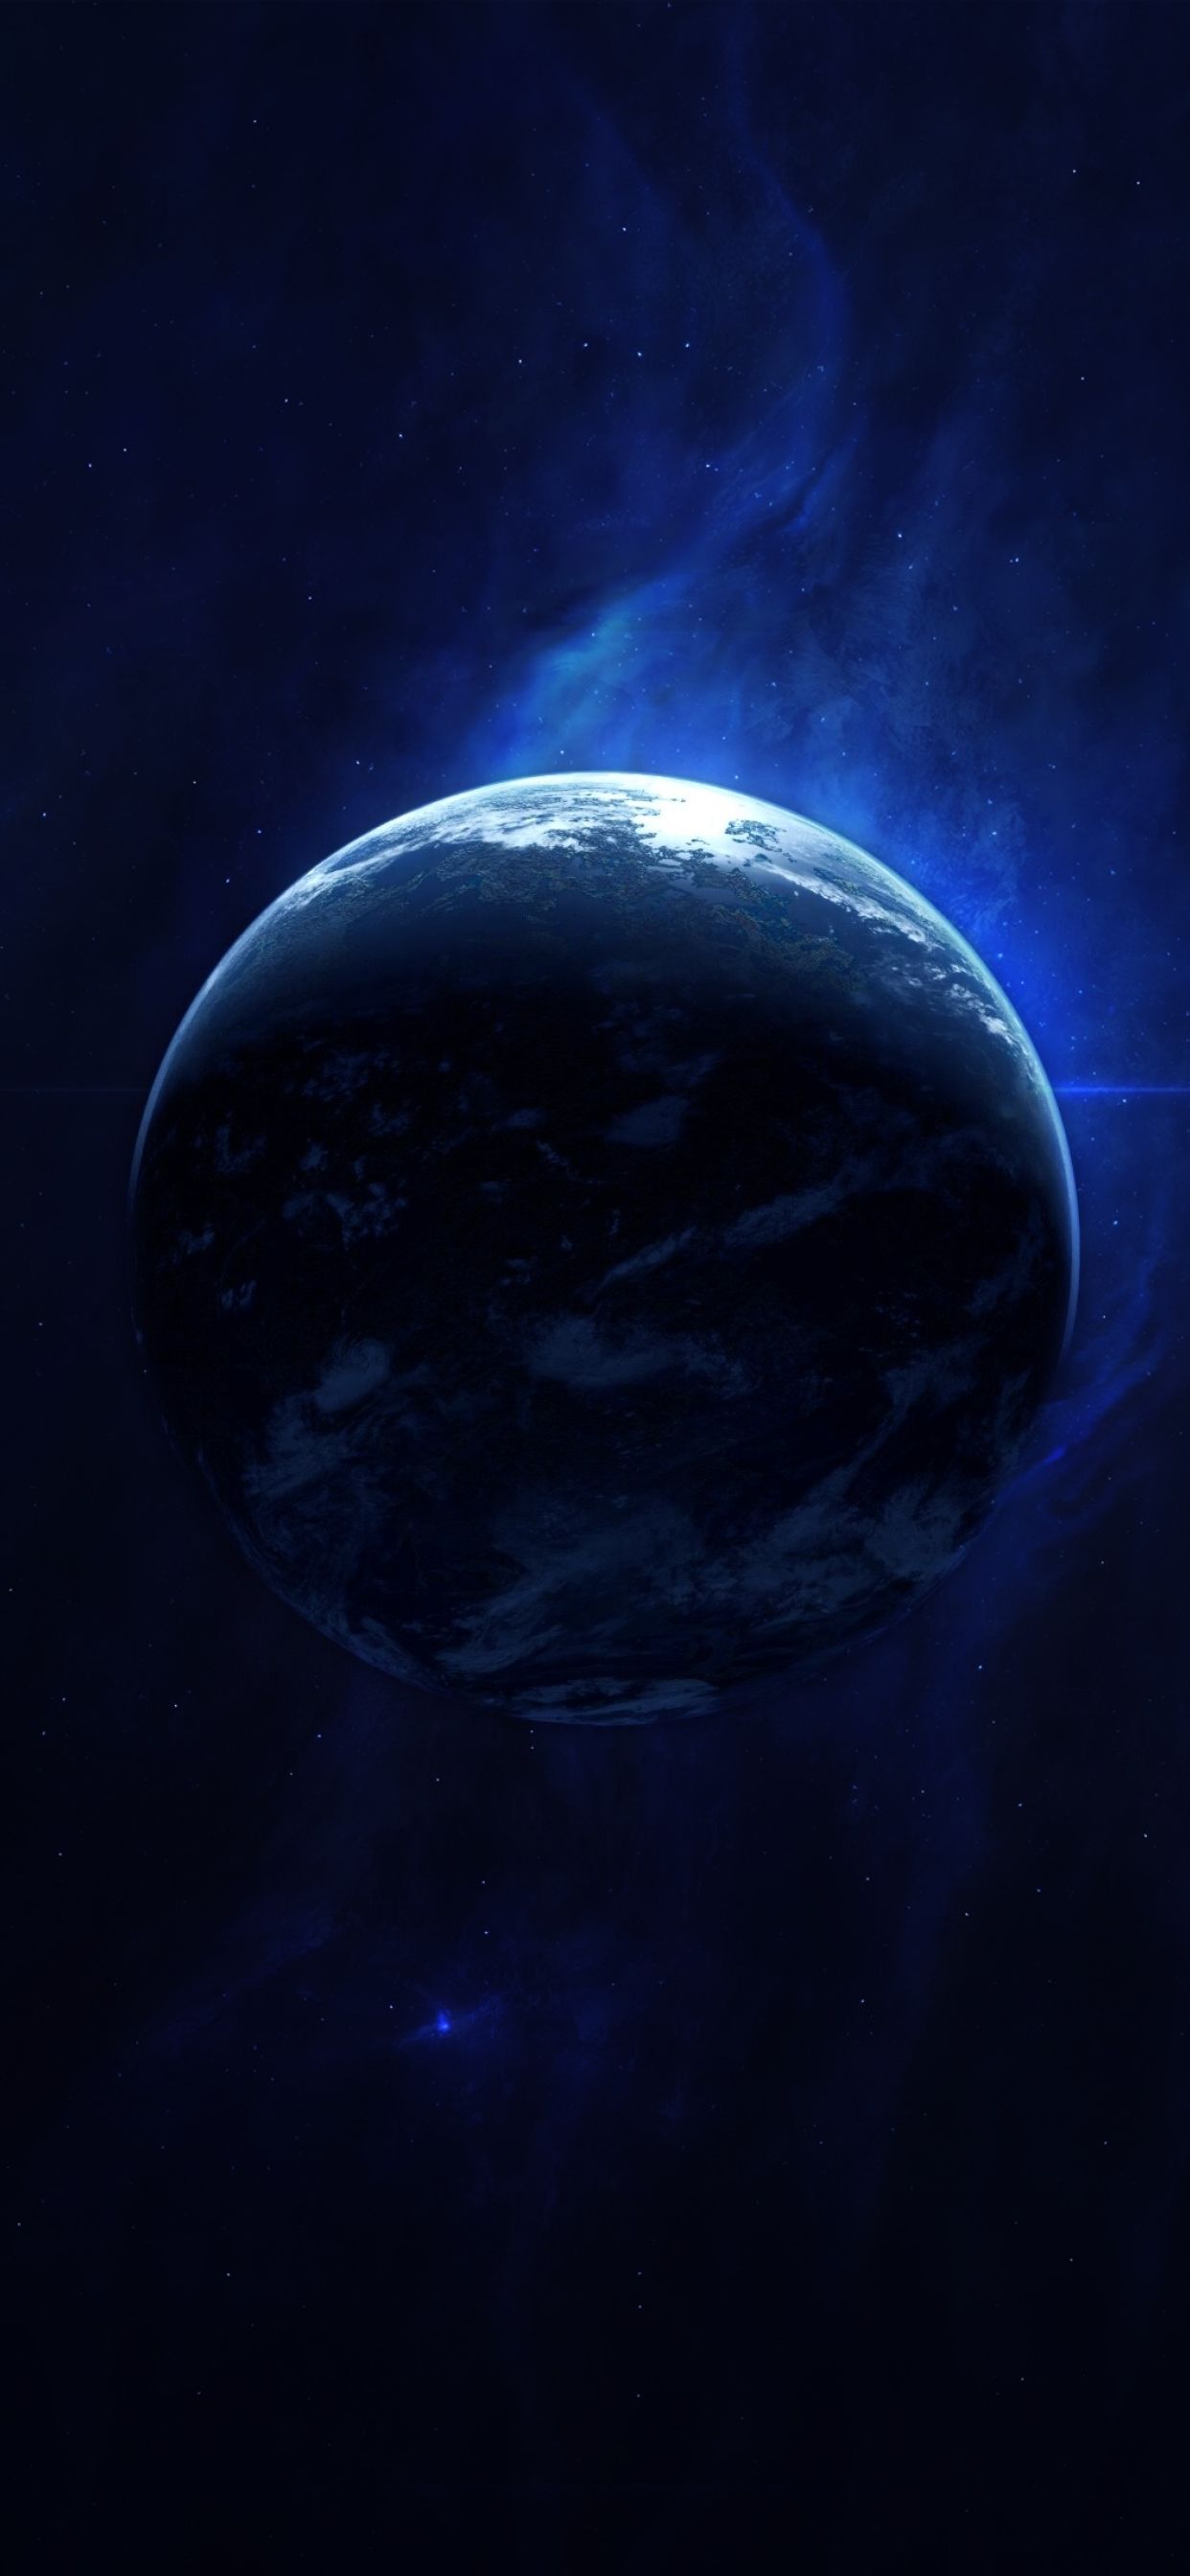 Planet In Space 4K iPhone XS MAX Wallpaper, HD Space 4K